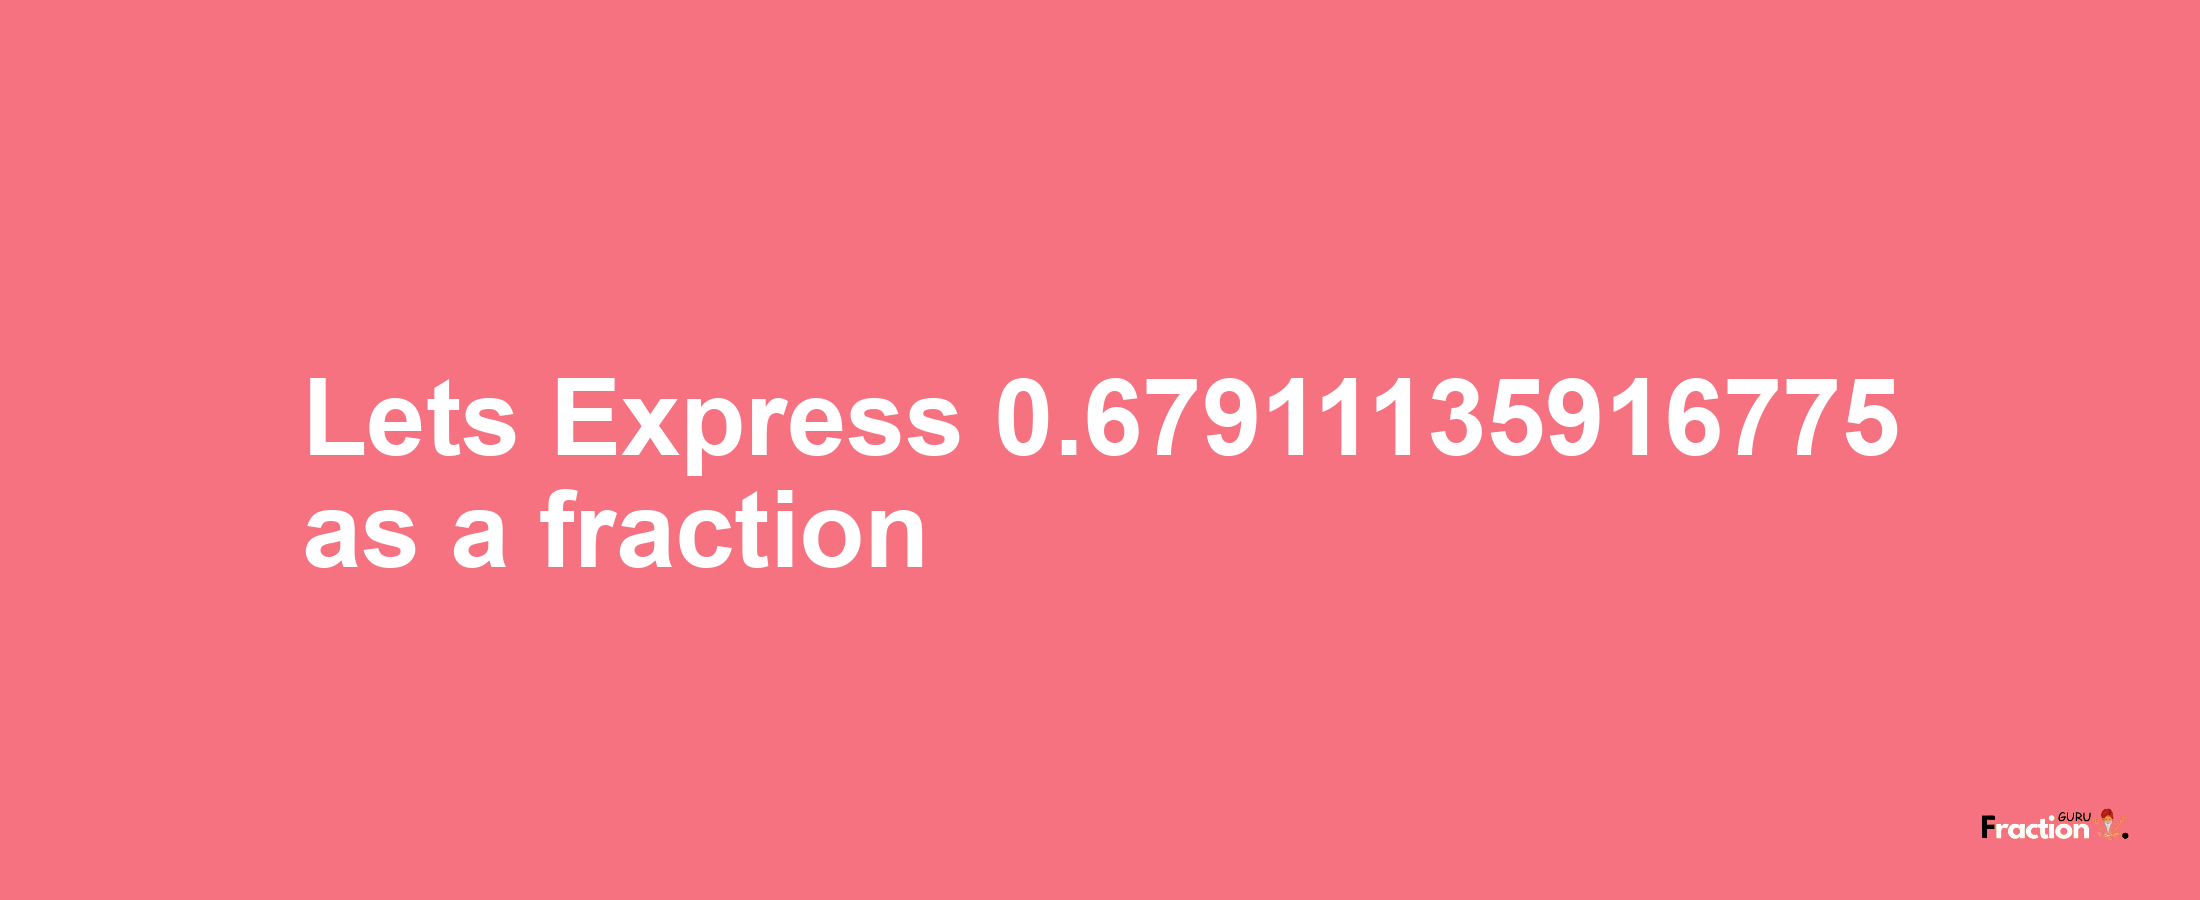 Lets Express 0.67911135916775 as afraction